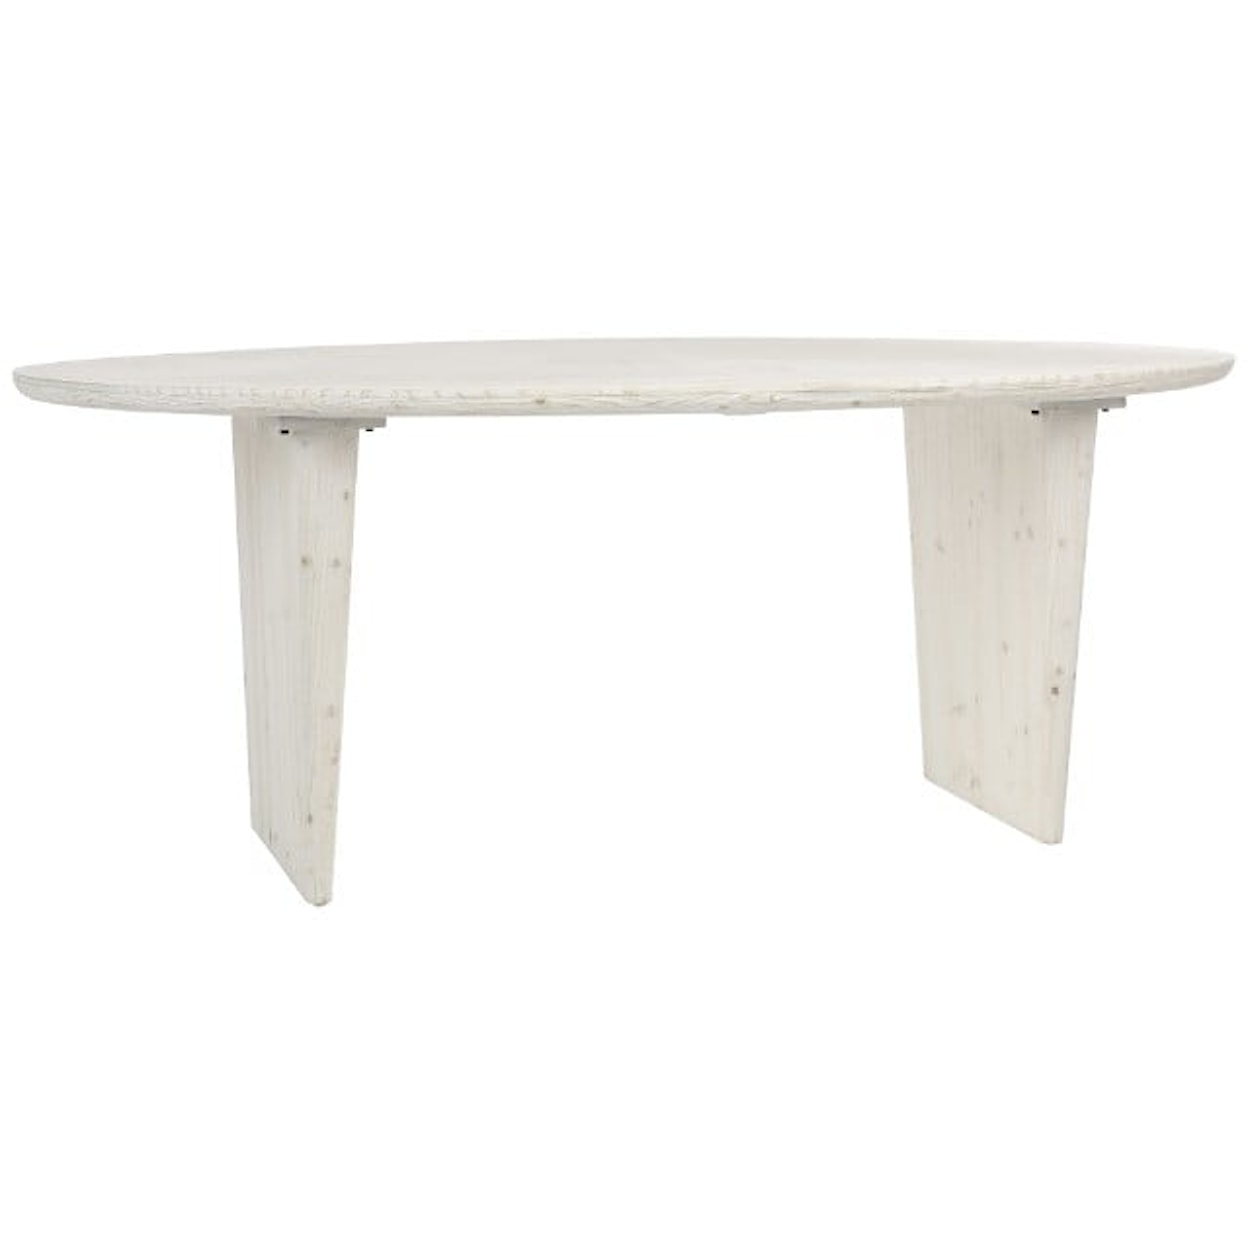 Dovetail Furniture Dining Tables Celine Dining Table